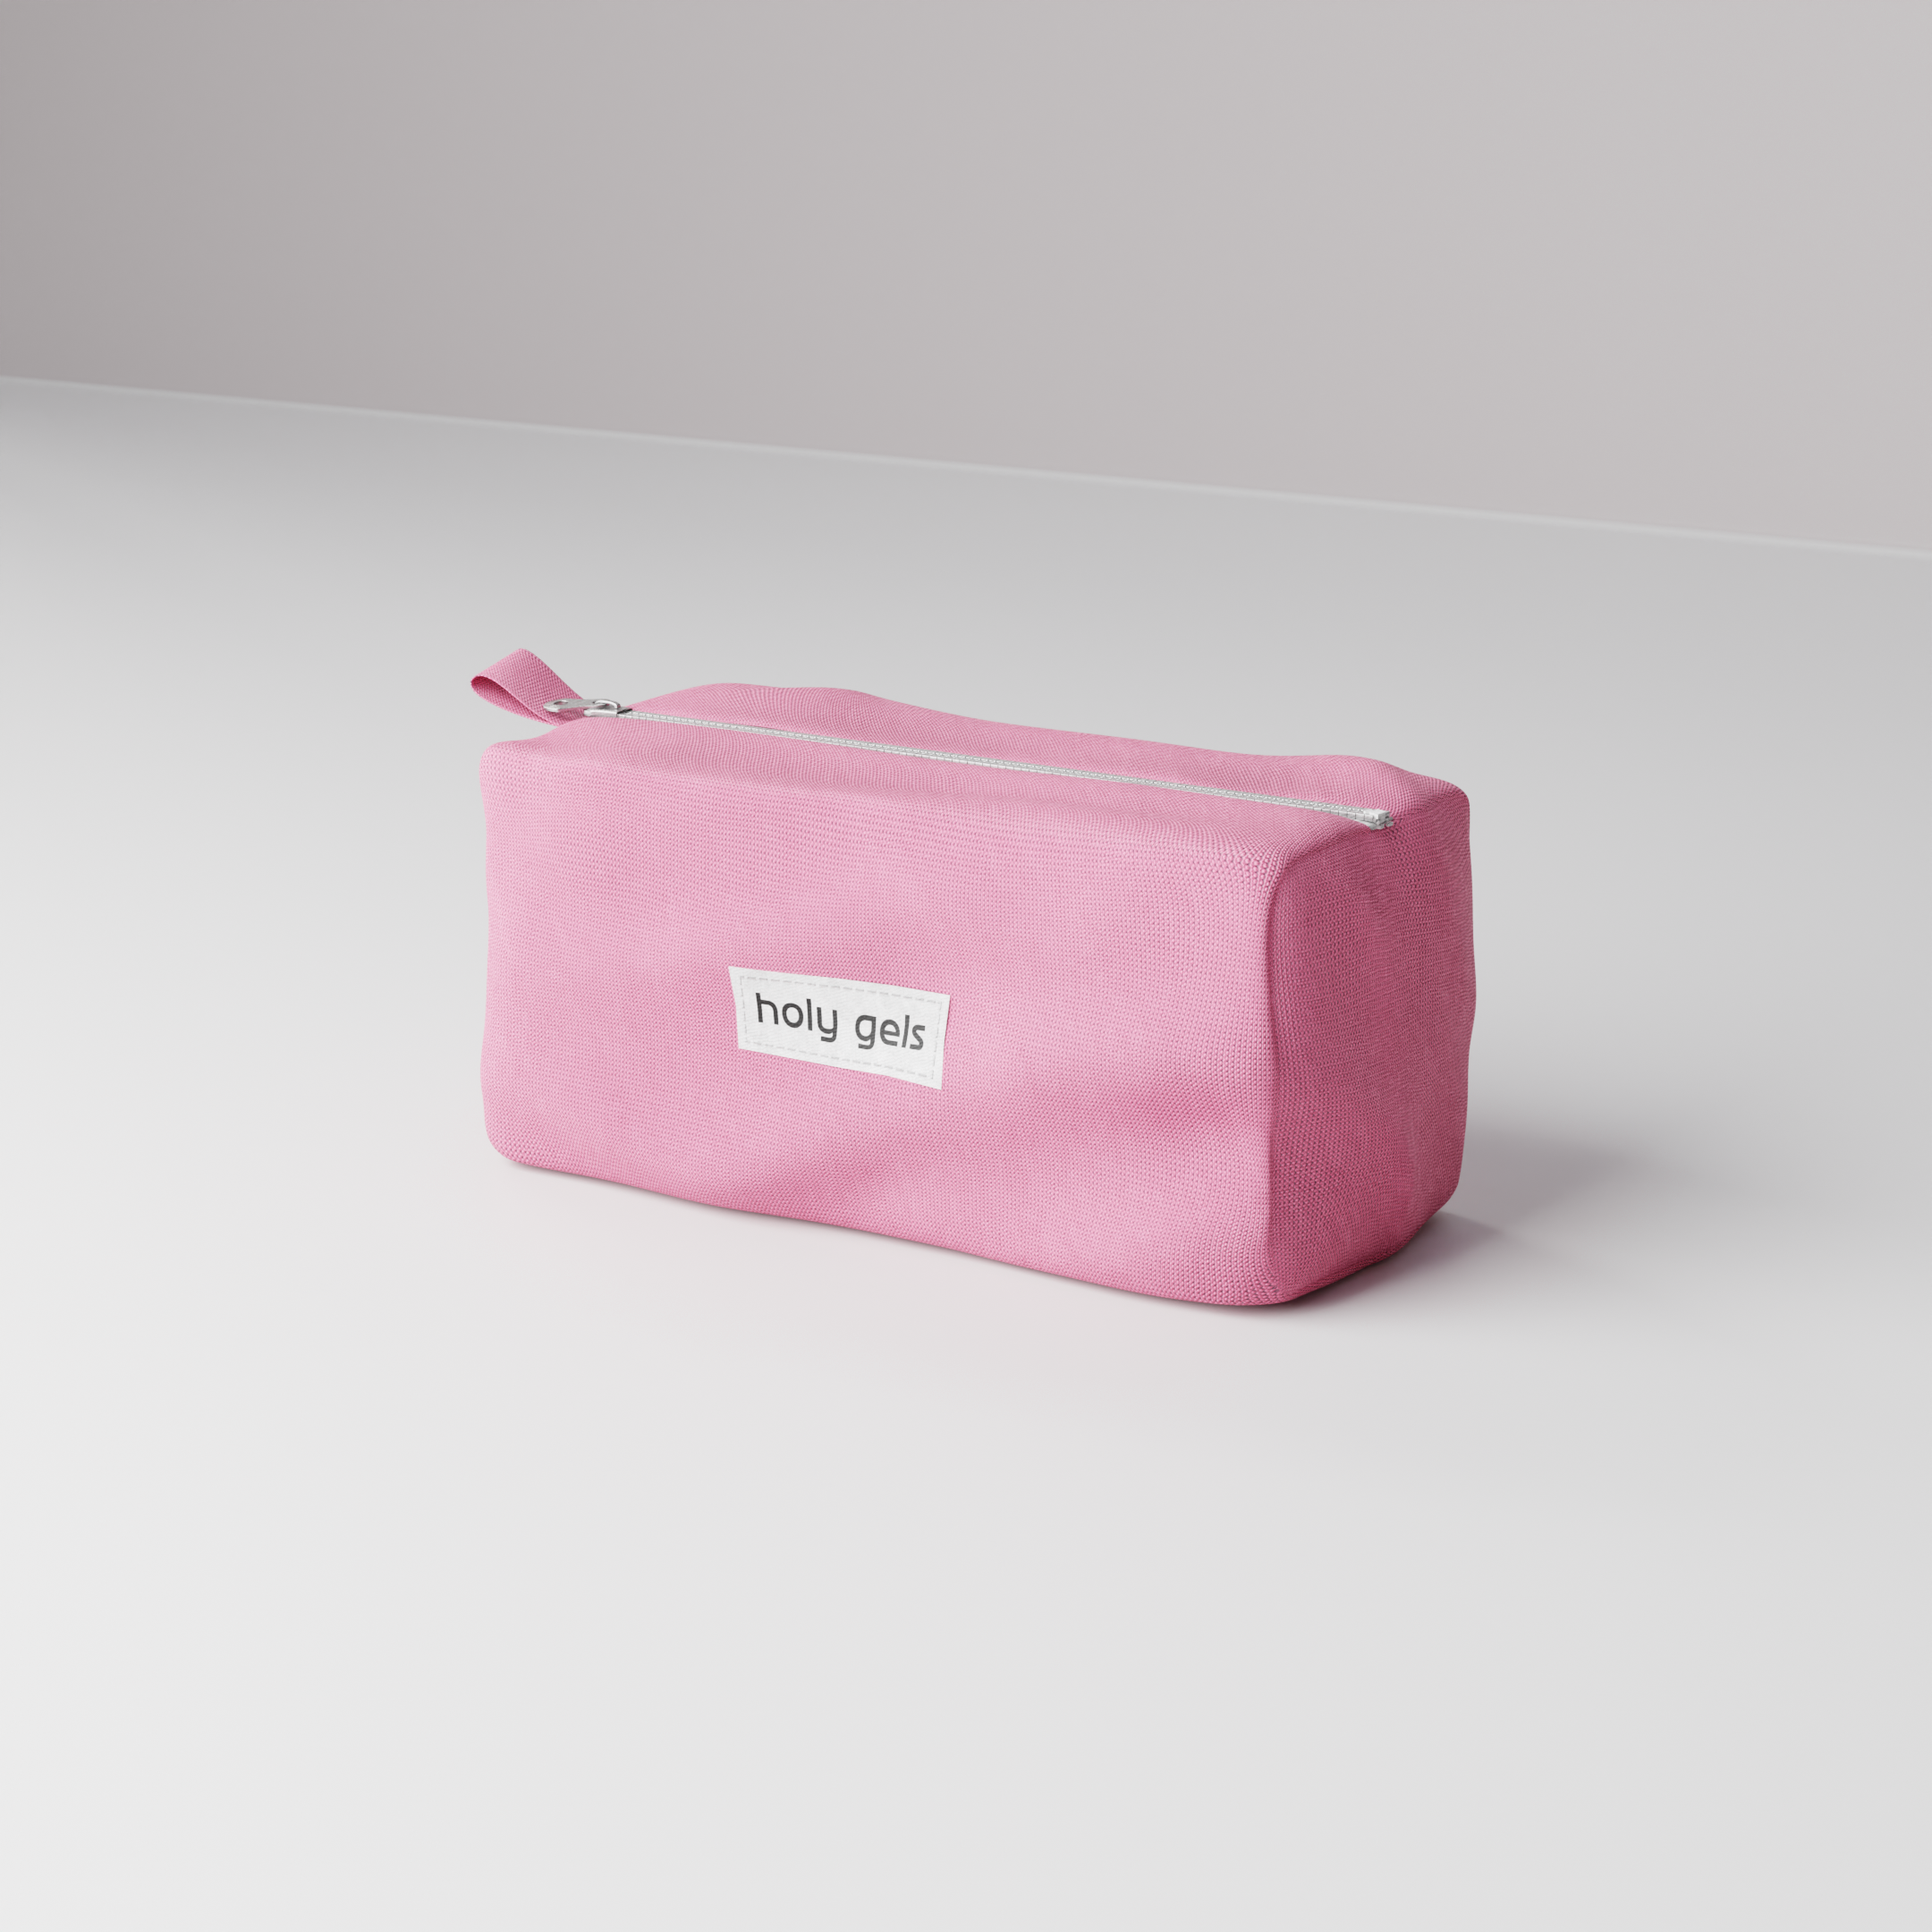 Pouch03_1_e76f20fc-5d18-4a10-912c-a0319dce34f0.png